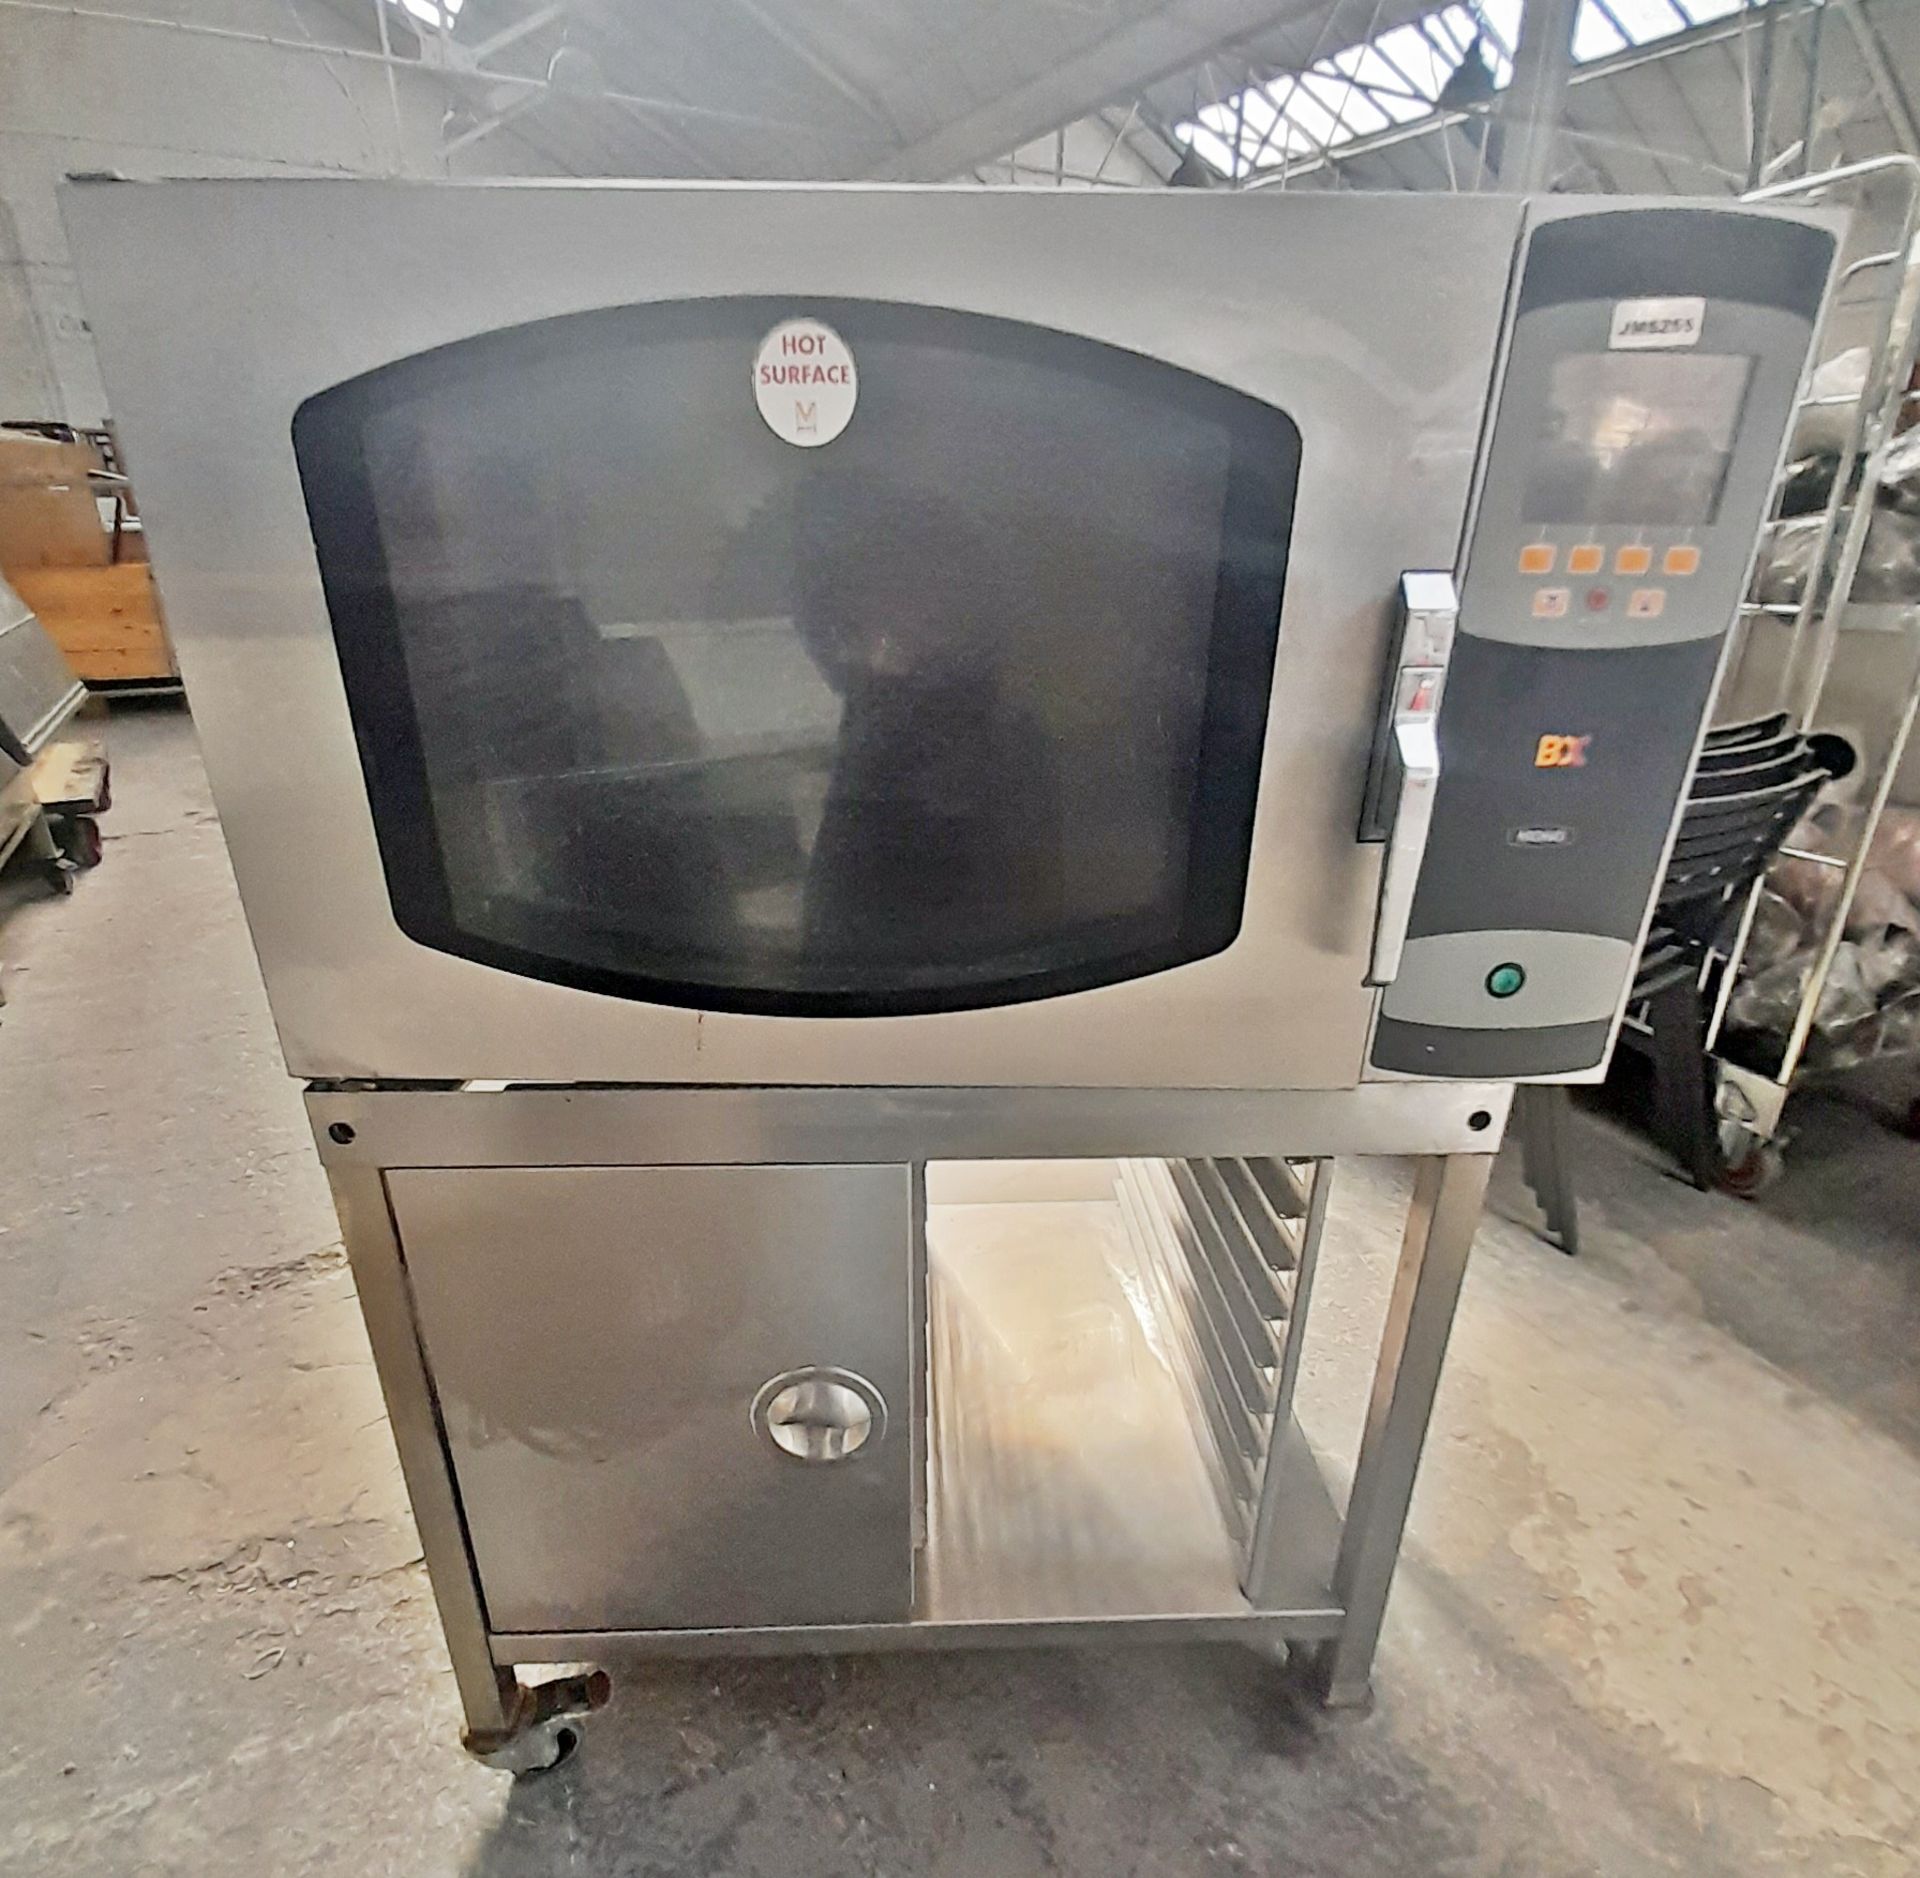 1 x Mono BX Bakery Oven With Stand - 3 Phase Power - Image 5 of 8